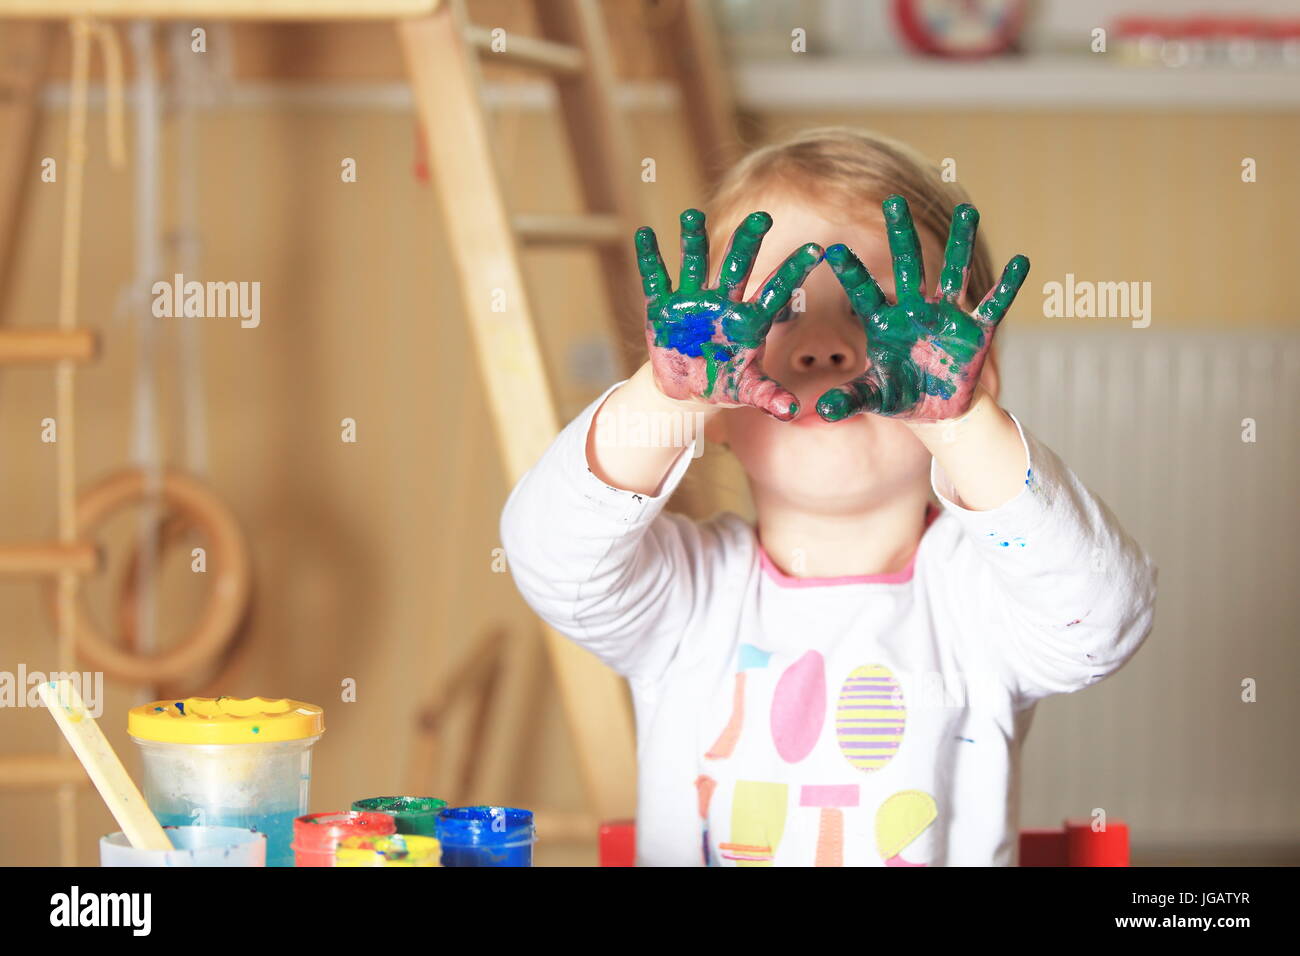 Girl show hands in green paint. Funny theme of children's drawing art. Stock Photo